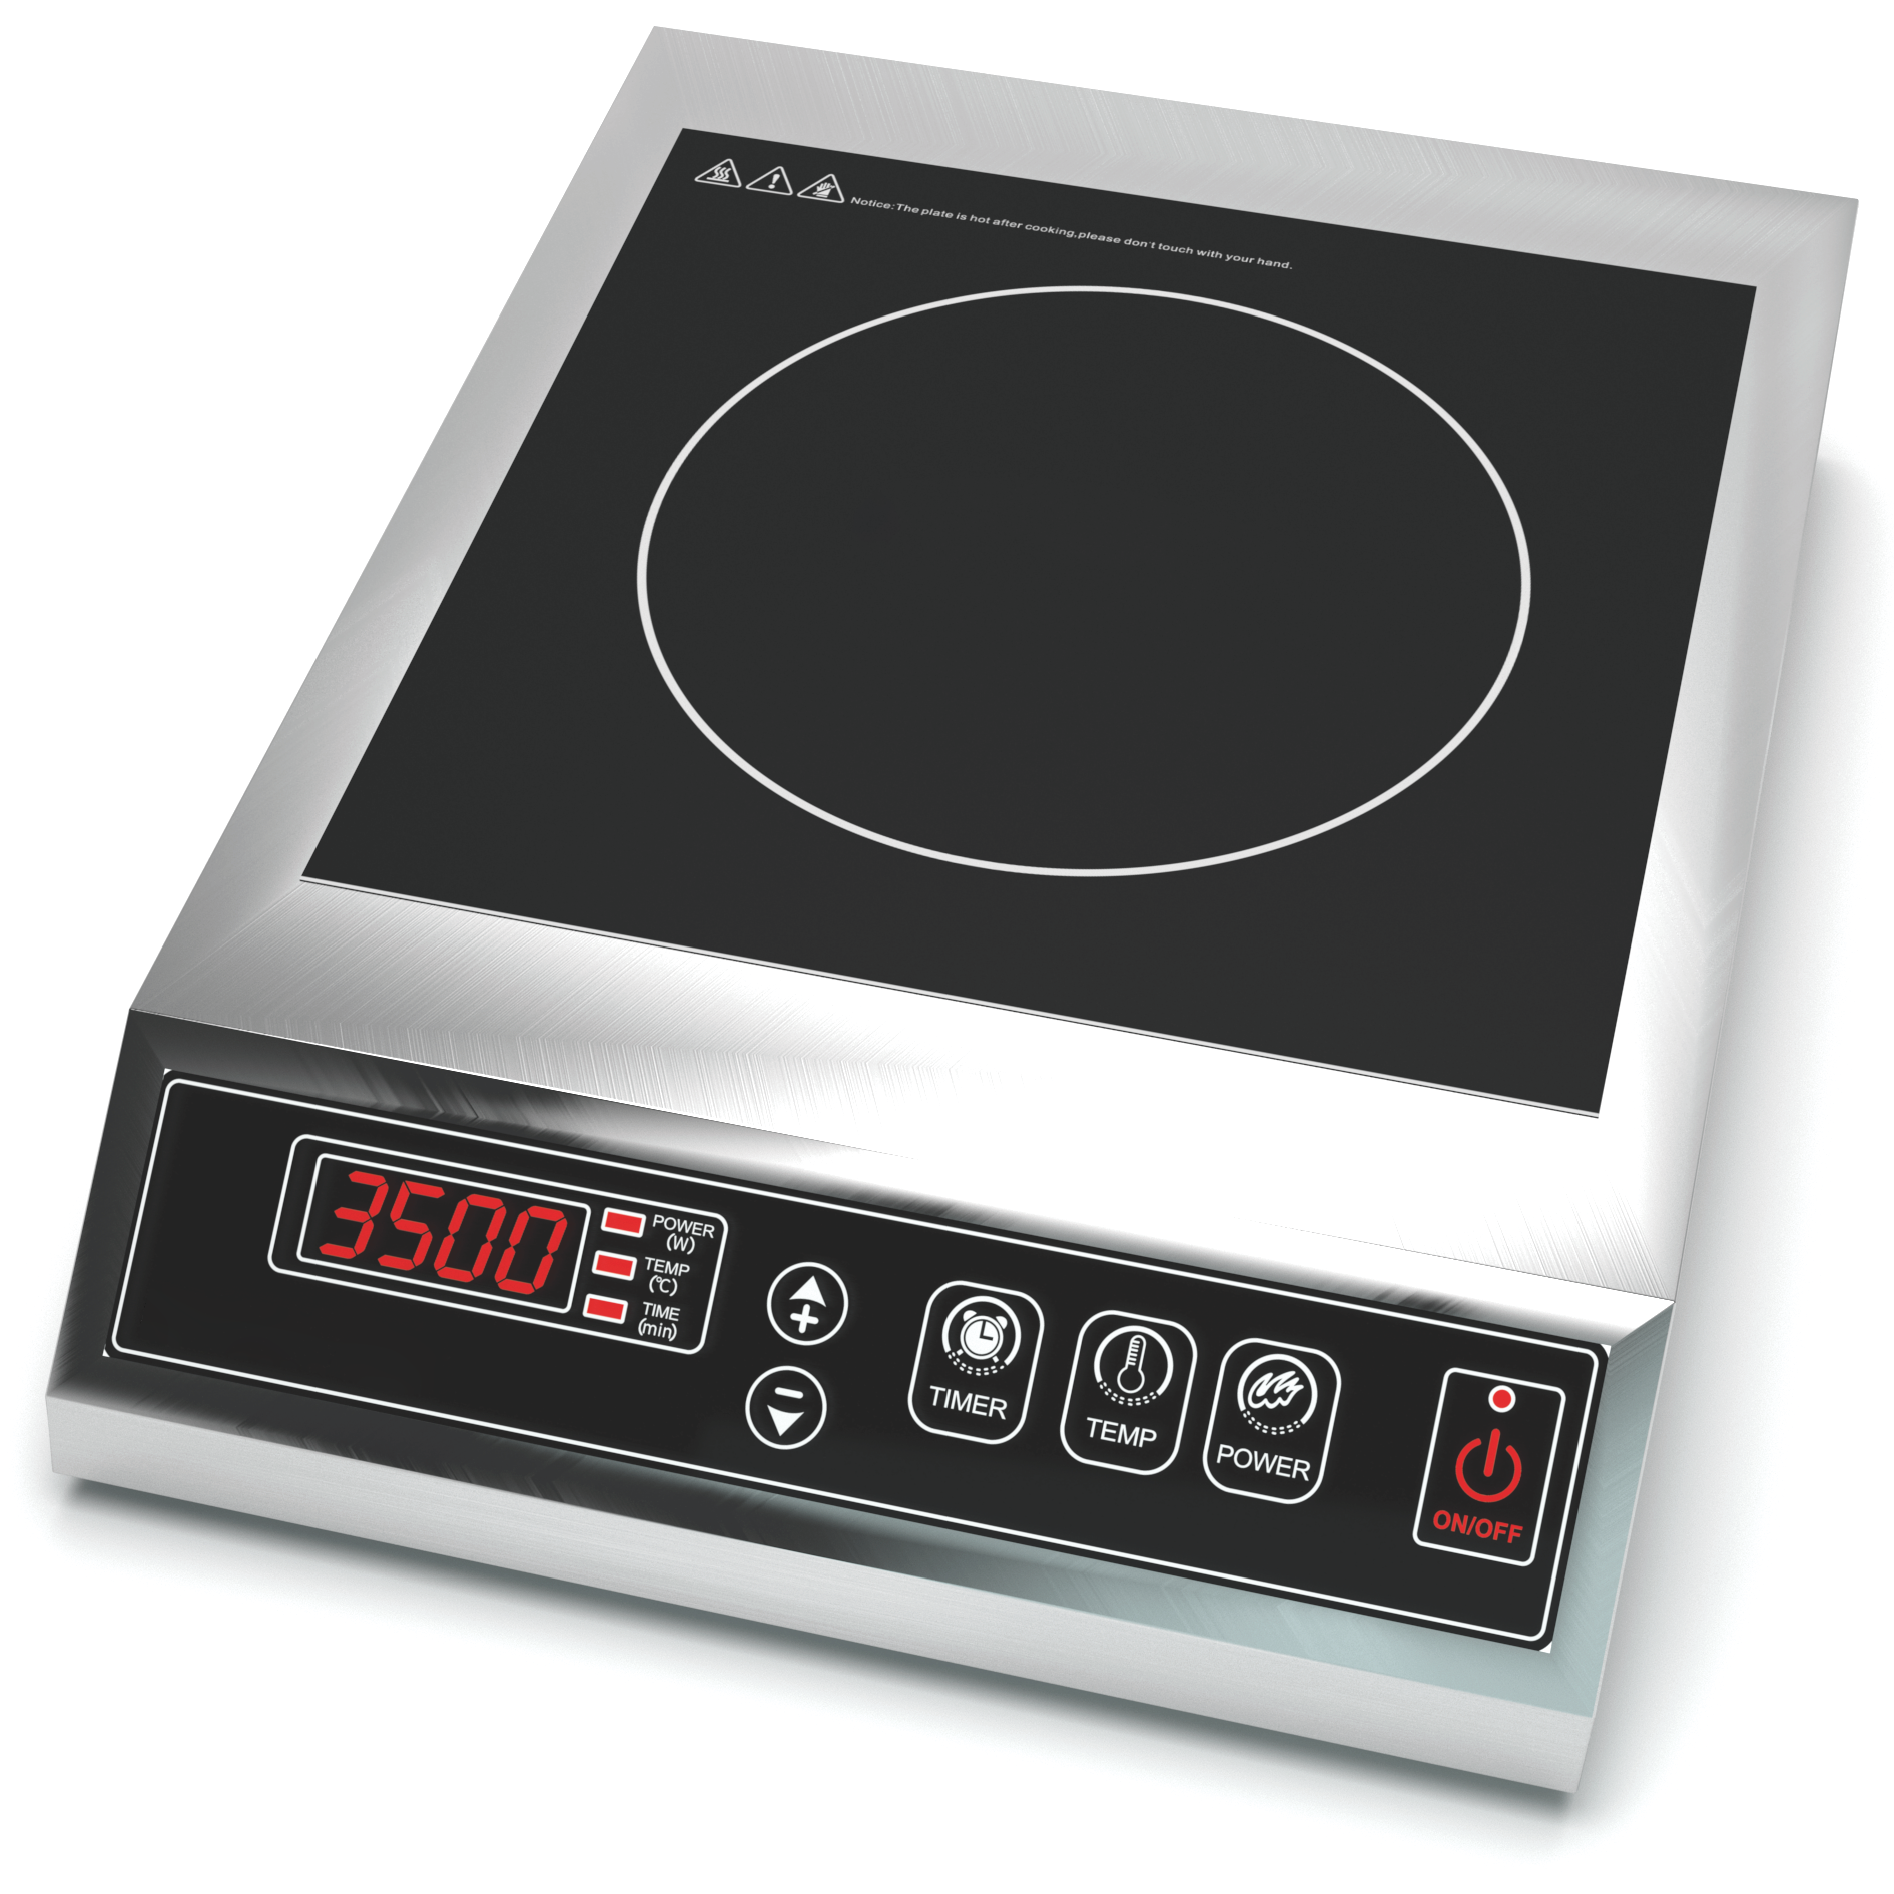 LS-3500B Commercial Induction Cooker